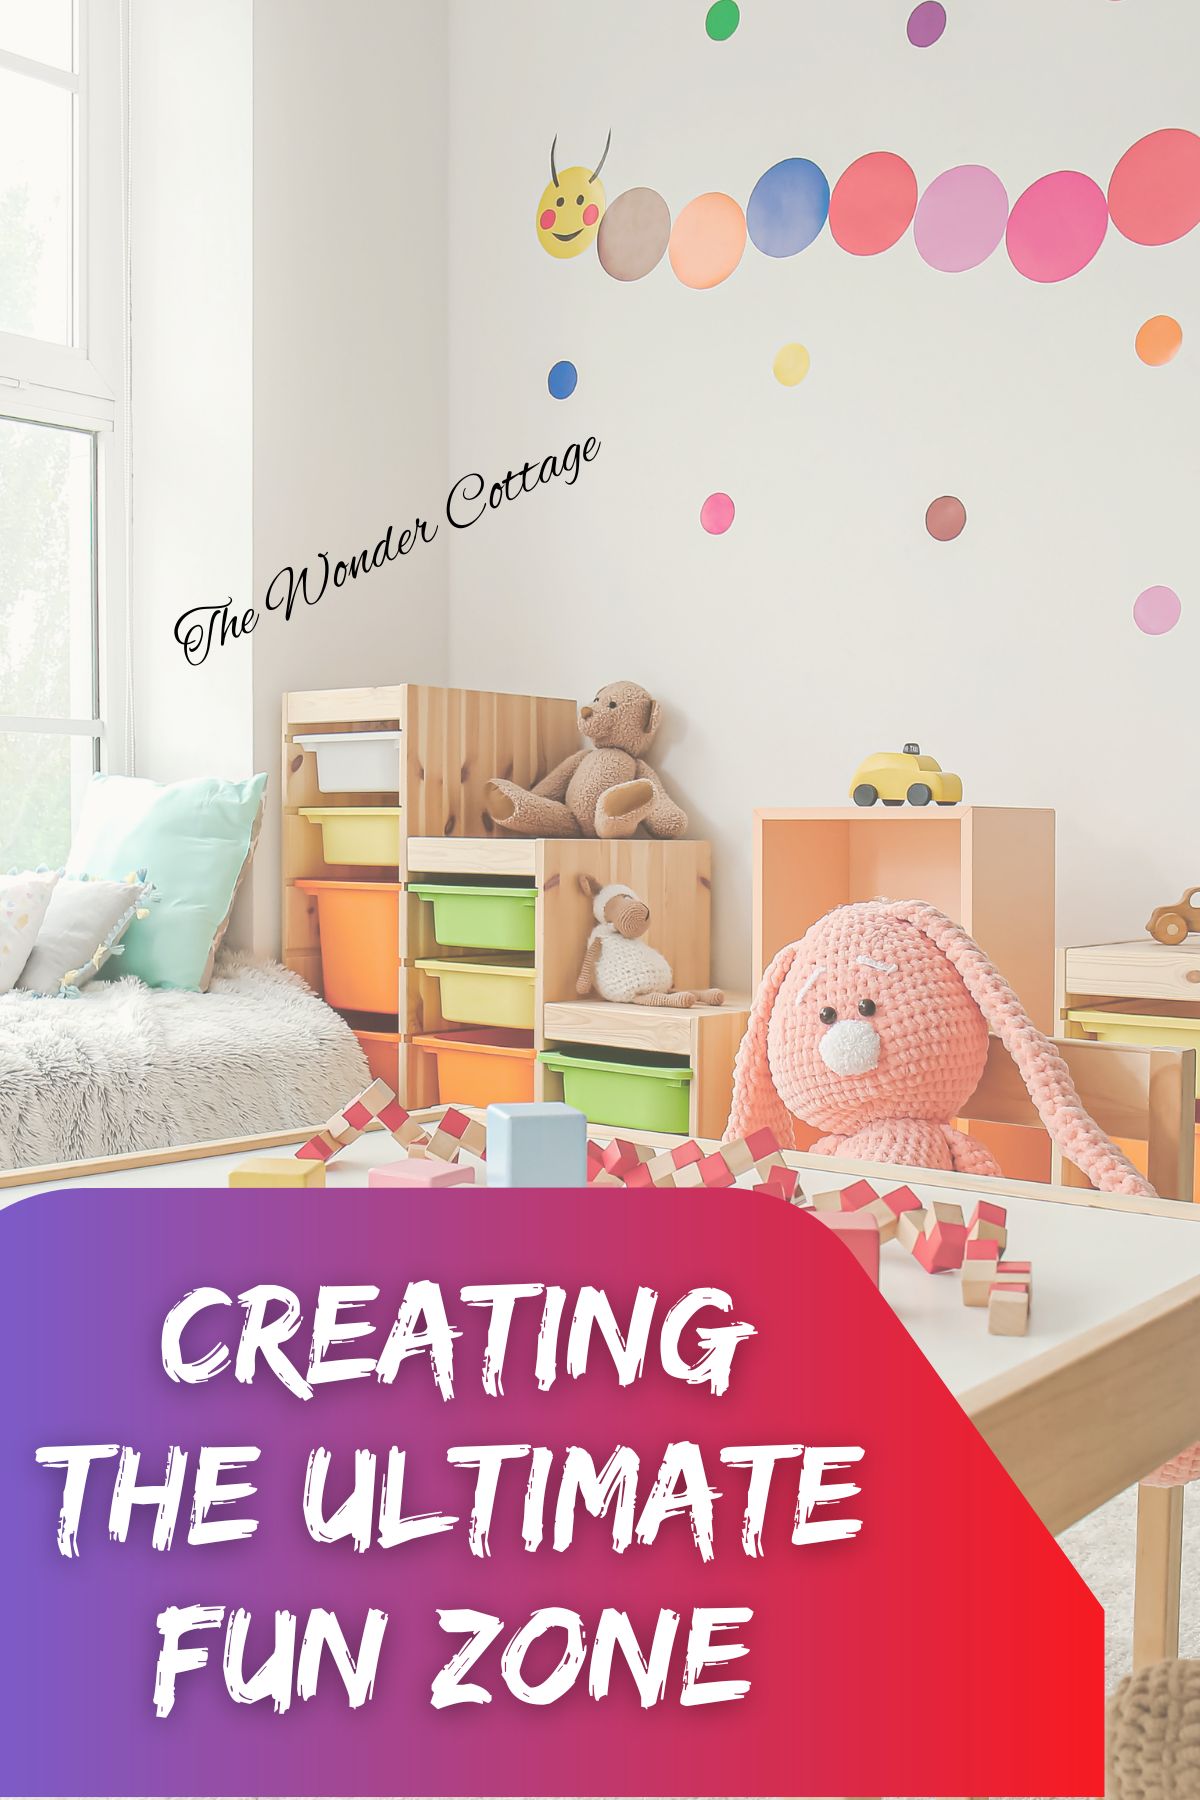 "Kids' Playroom Essentials: Building the Ultimate Fun Zone"
